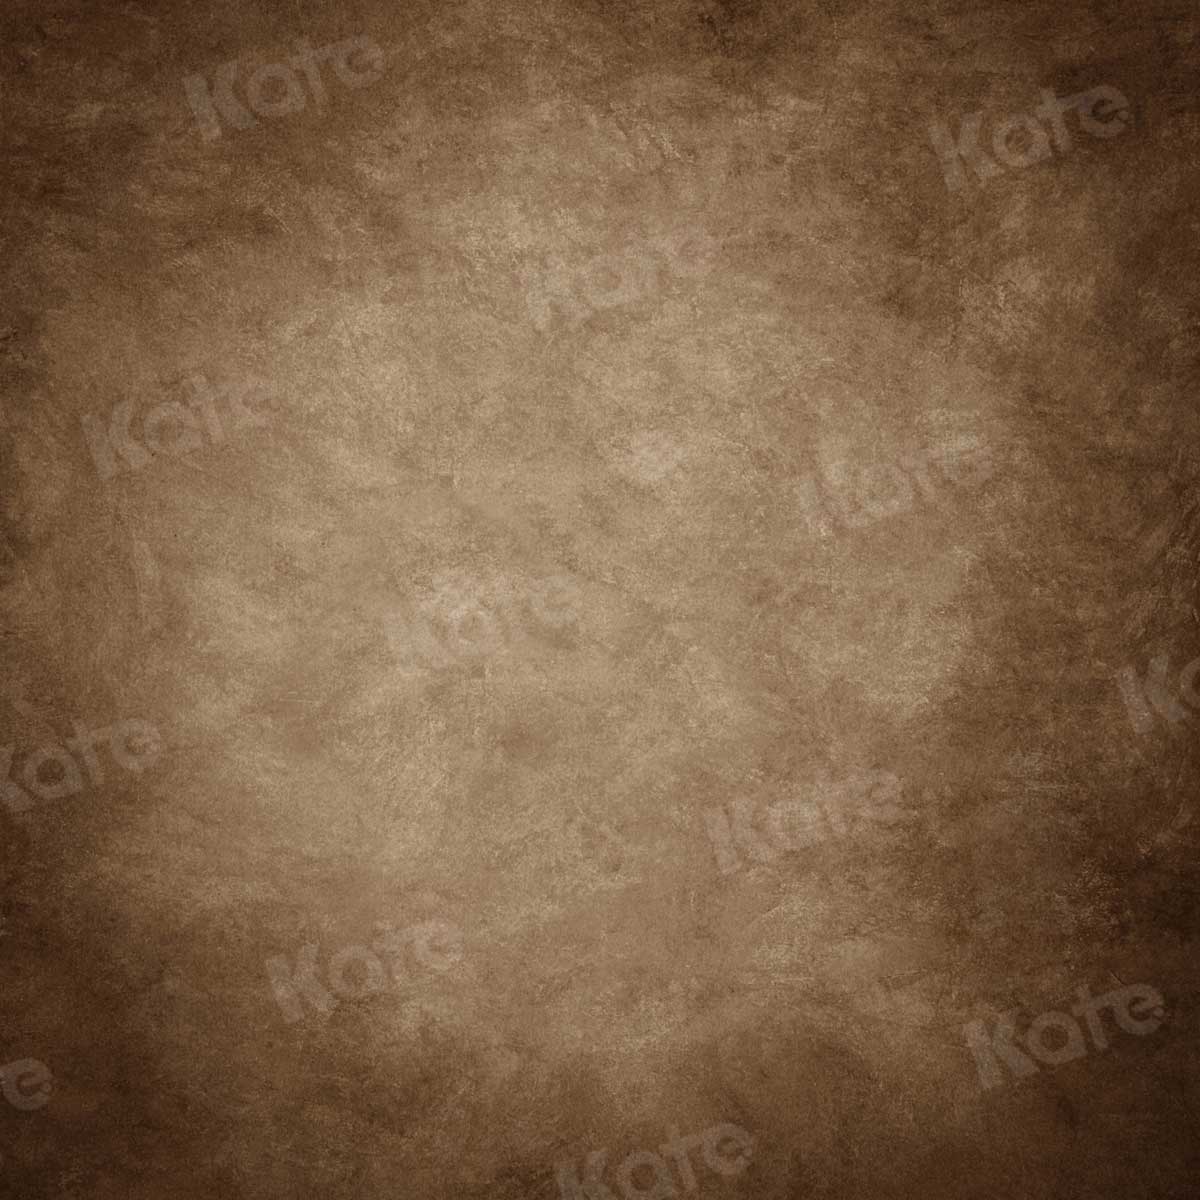 Kate Old Master Abstract Texture Dark Brown Backdrop for Photography